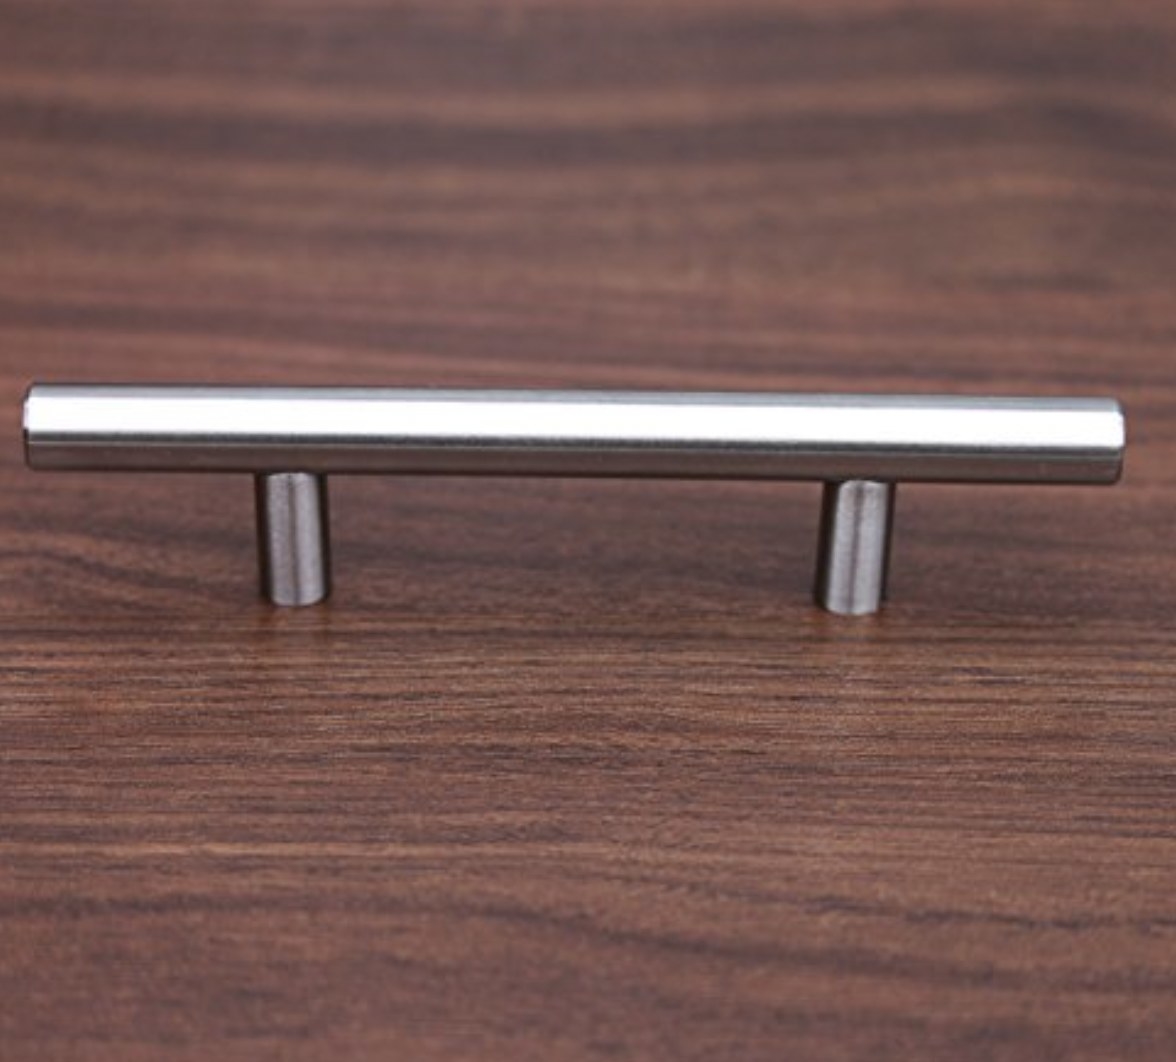 A metal cabinet handle sitting on a dark wooden surface